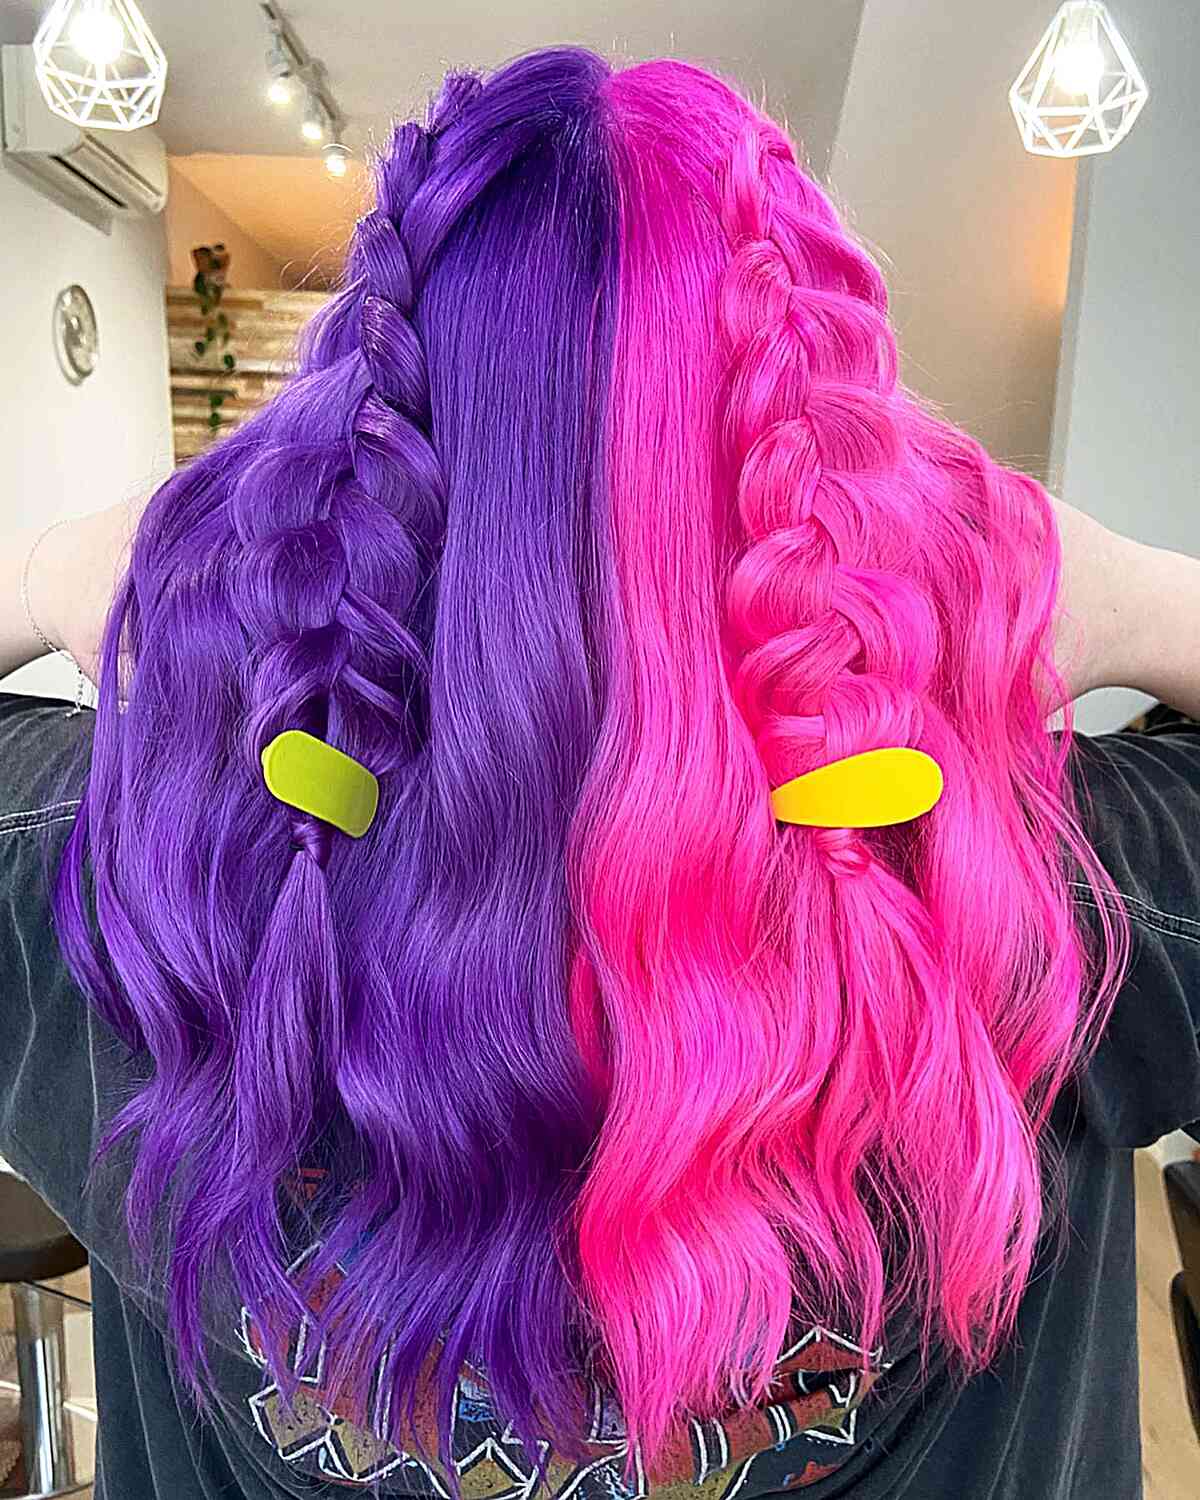 Split Dyed Long Cotton Candy Hair with Neon Pink and Purple Hues